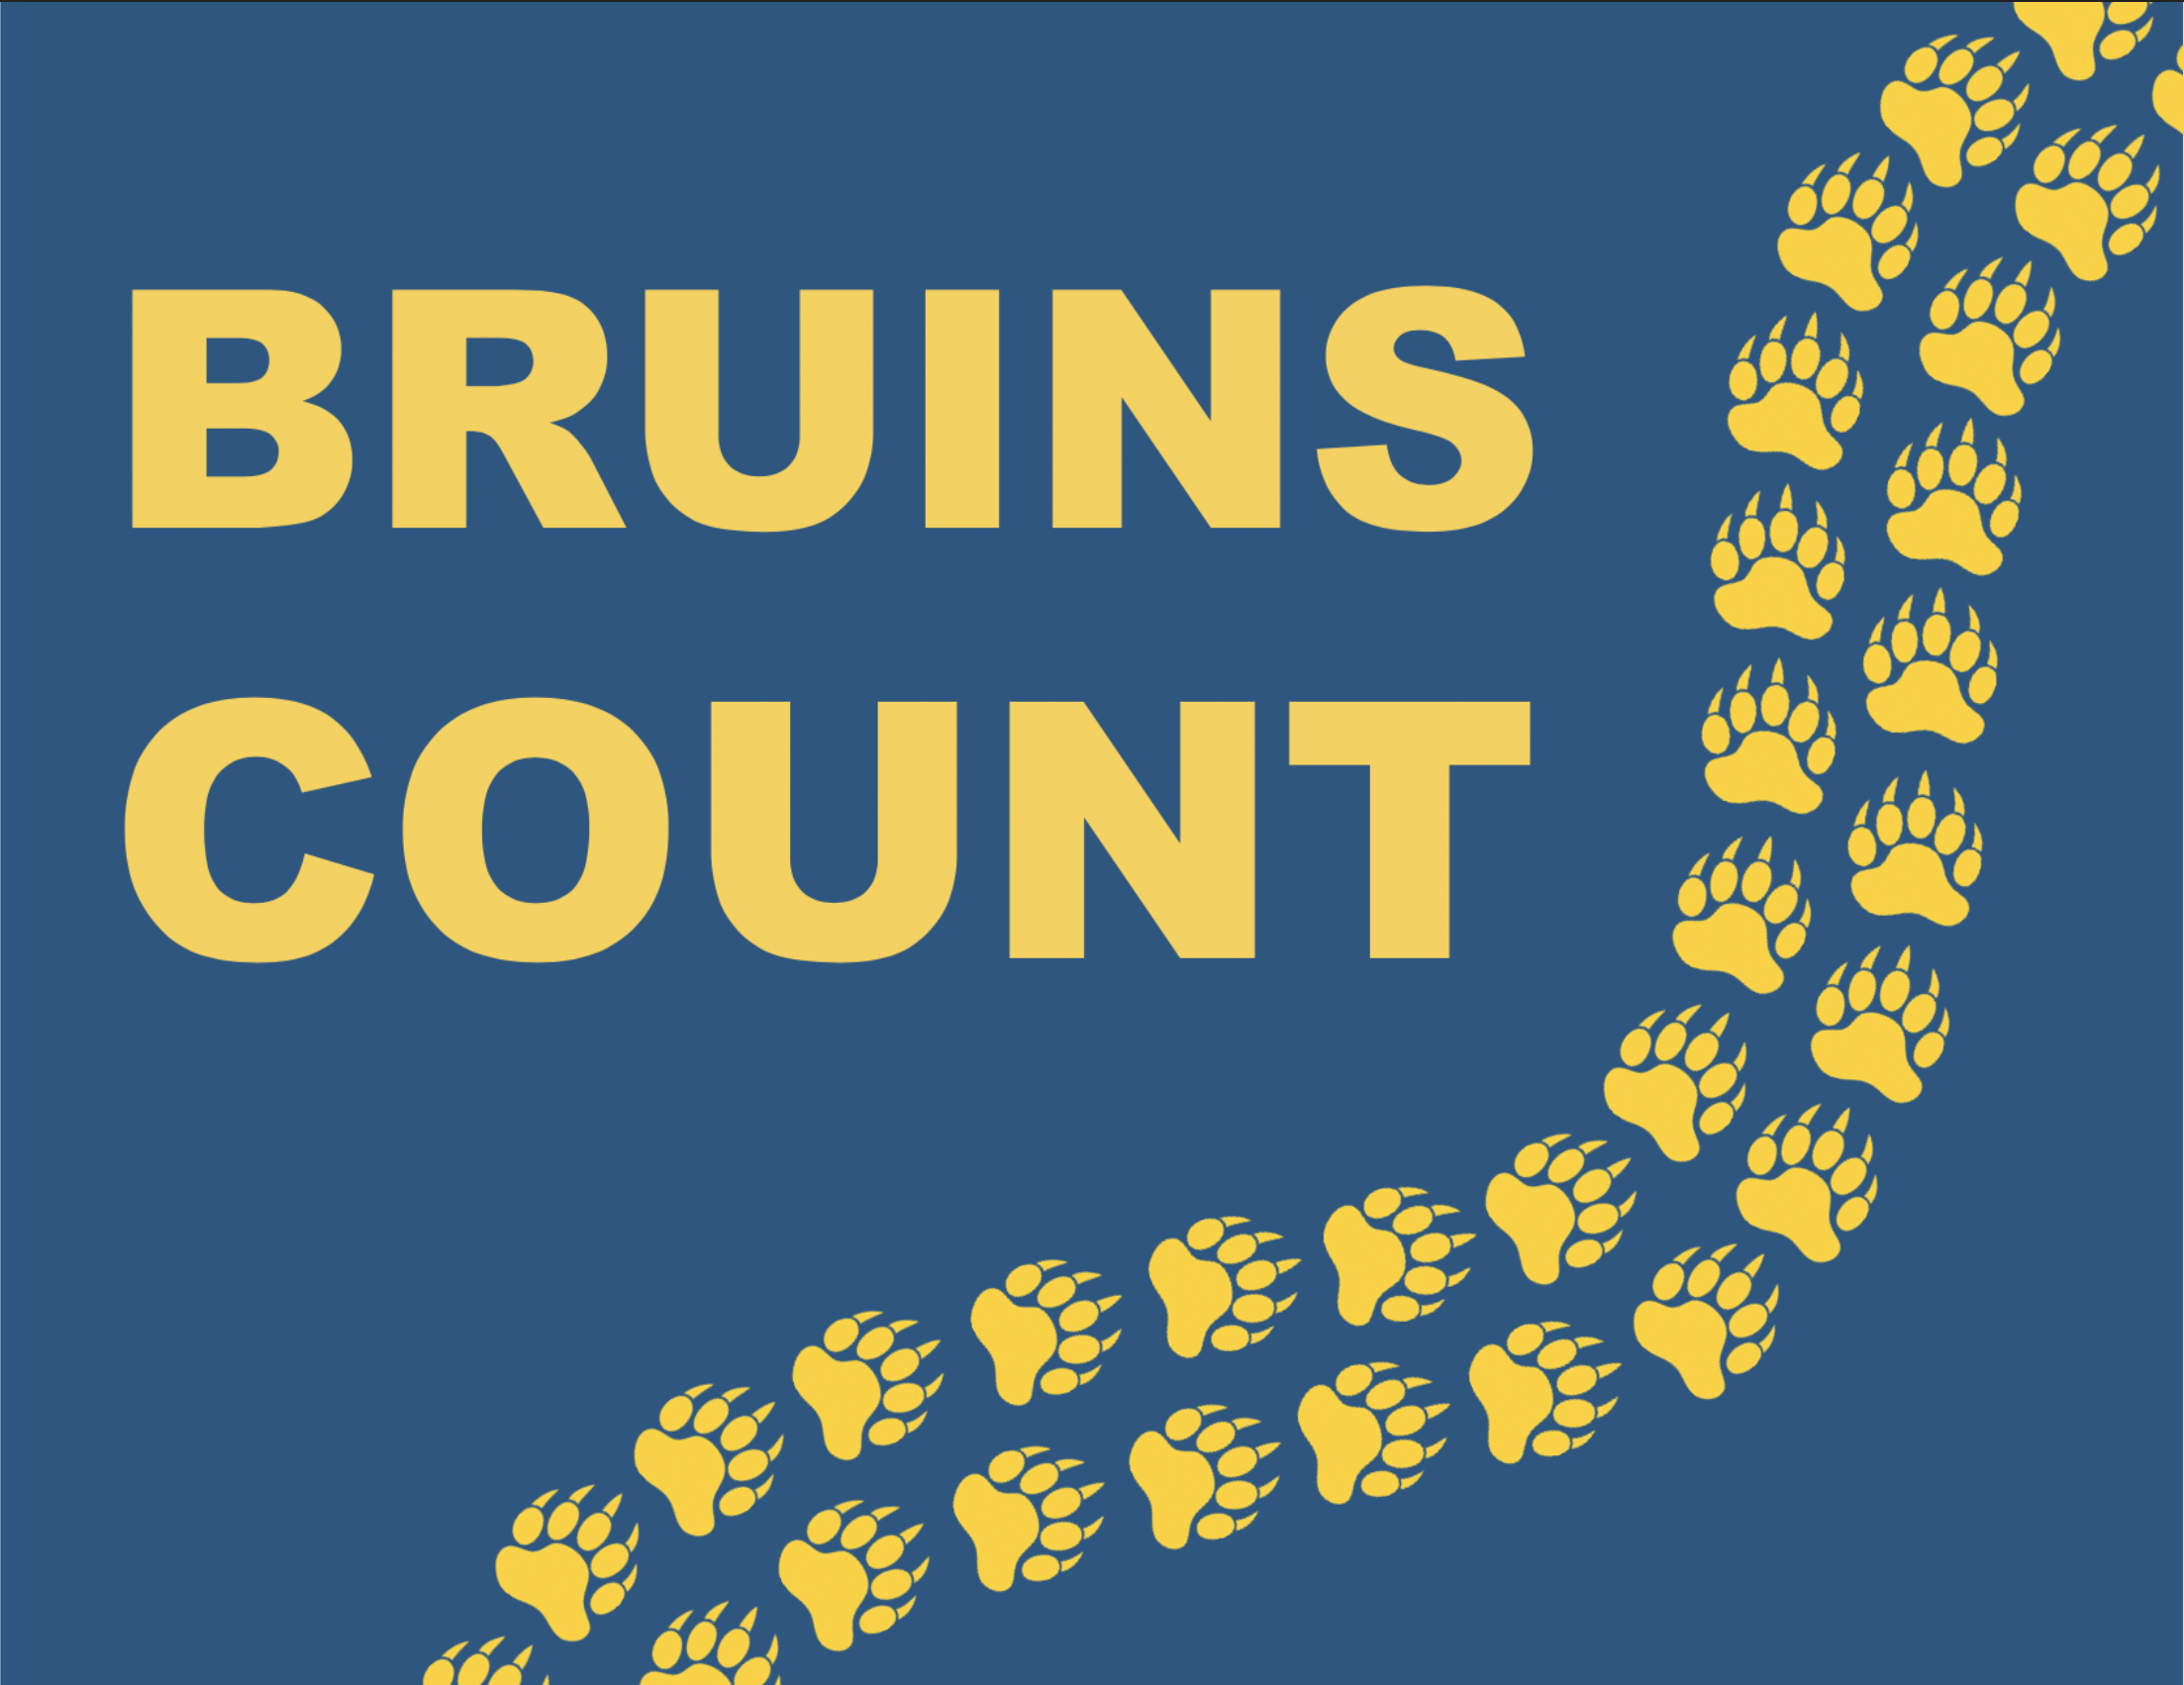 Bruins Count